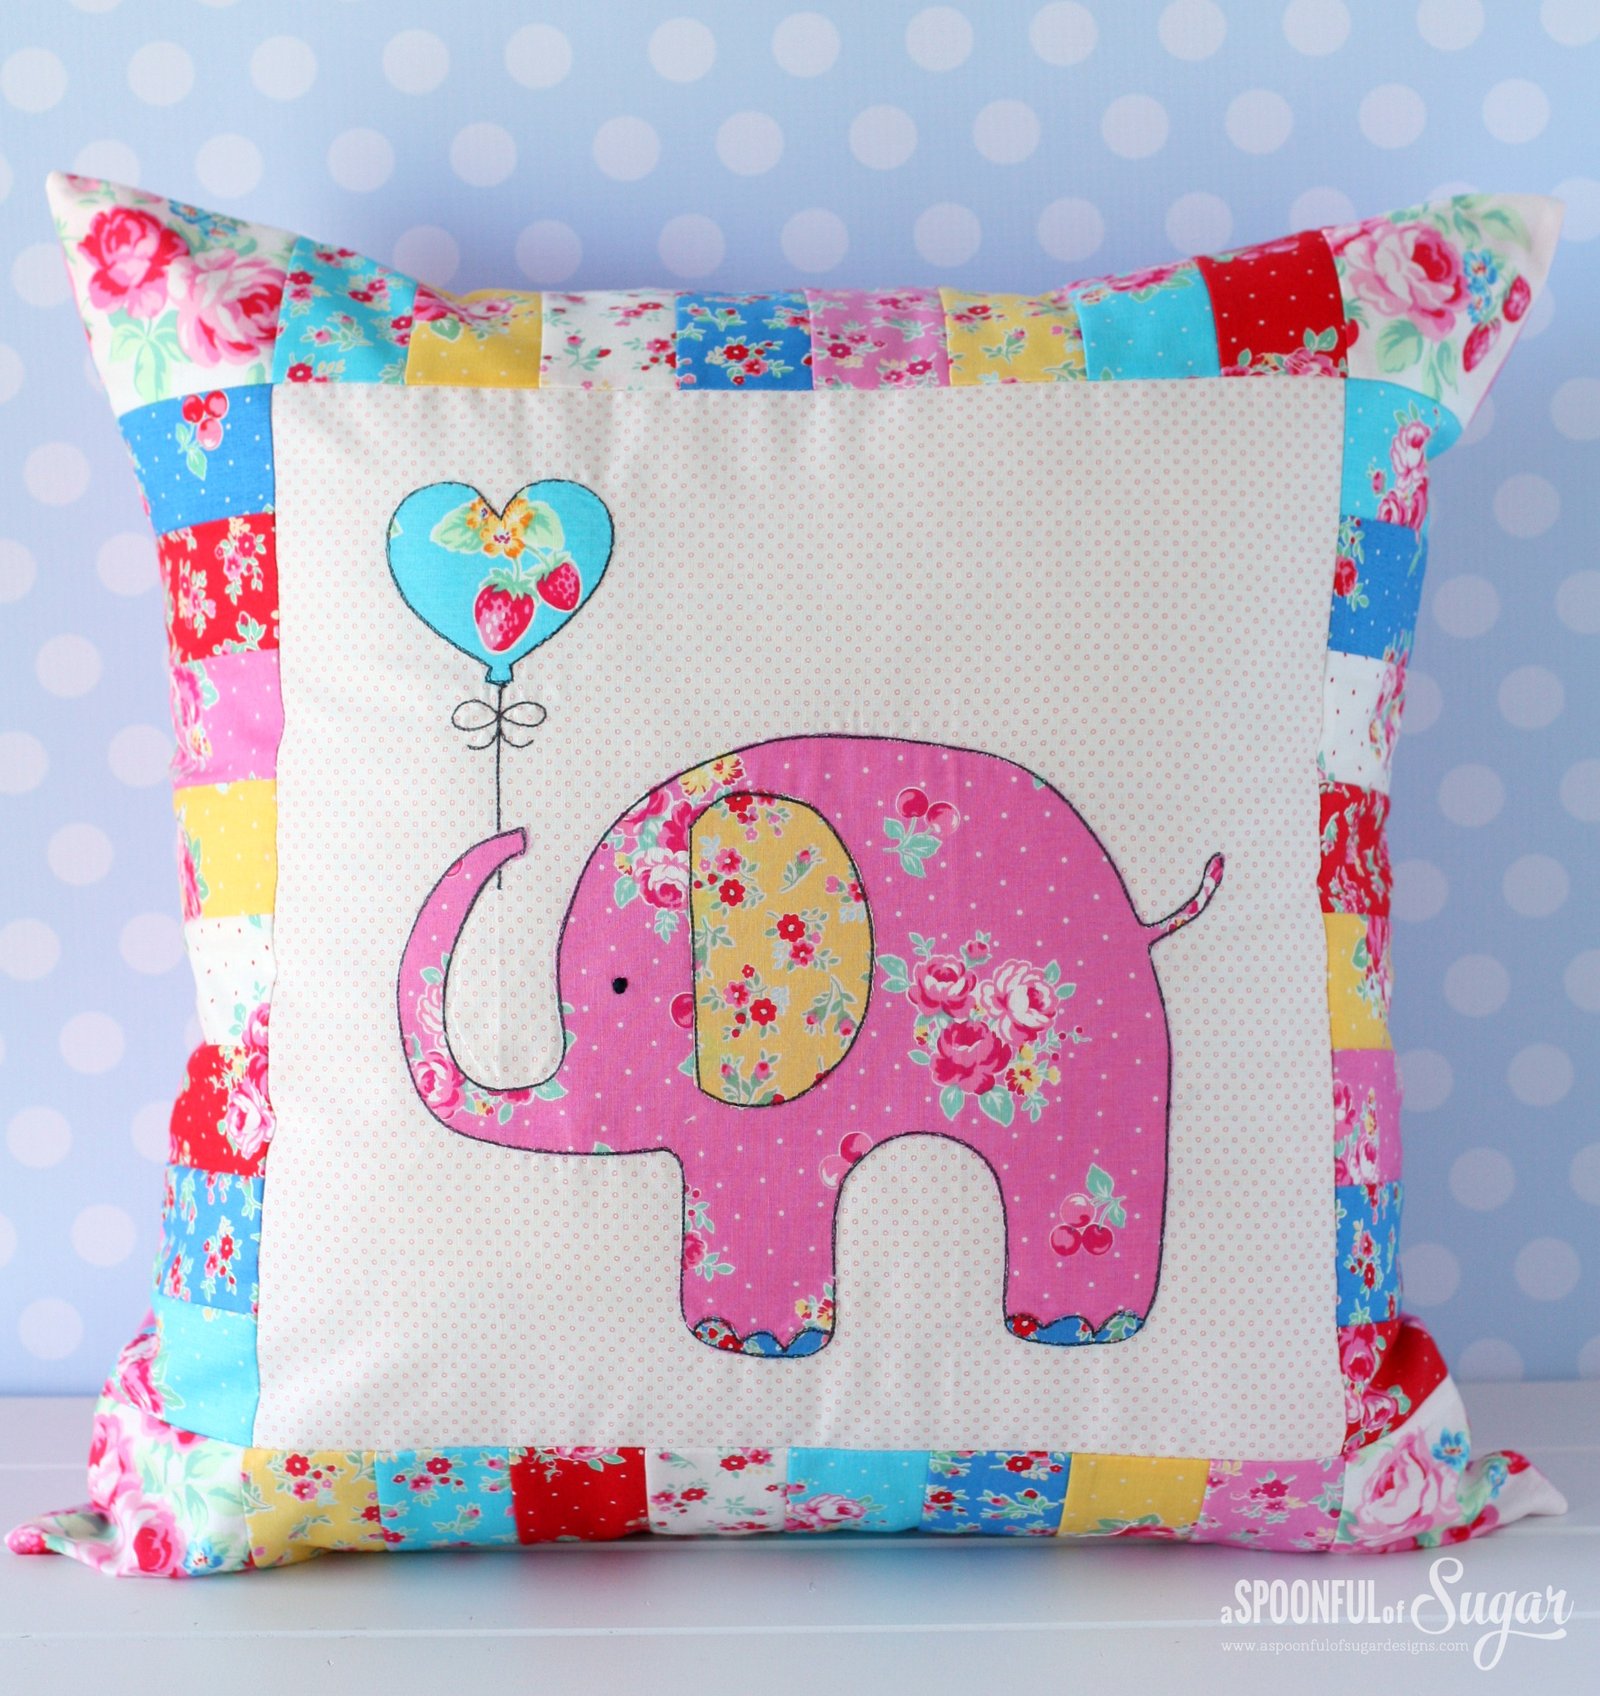 Sew a sweet Ella the Elephant Pillow using our newest pdf sewing pattern. Perfect for a nursery or child's room, it can be easily made in an afternoon. www.aspoonfulofsugardesigns.com